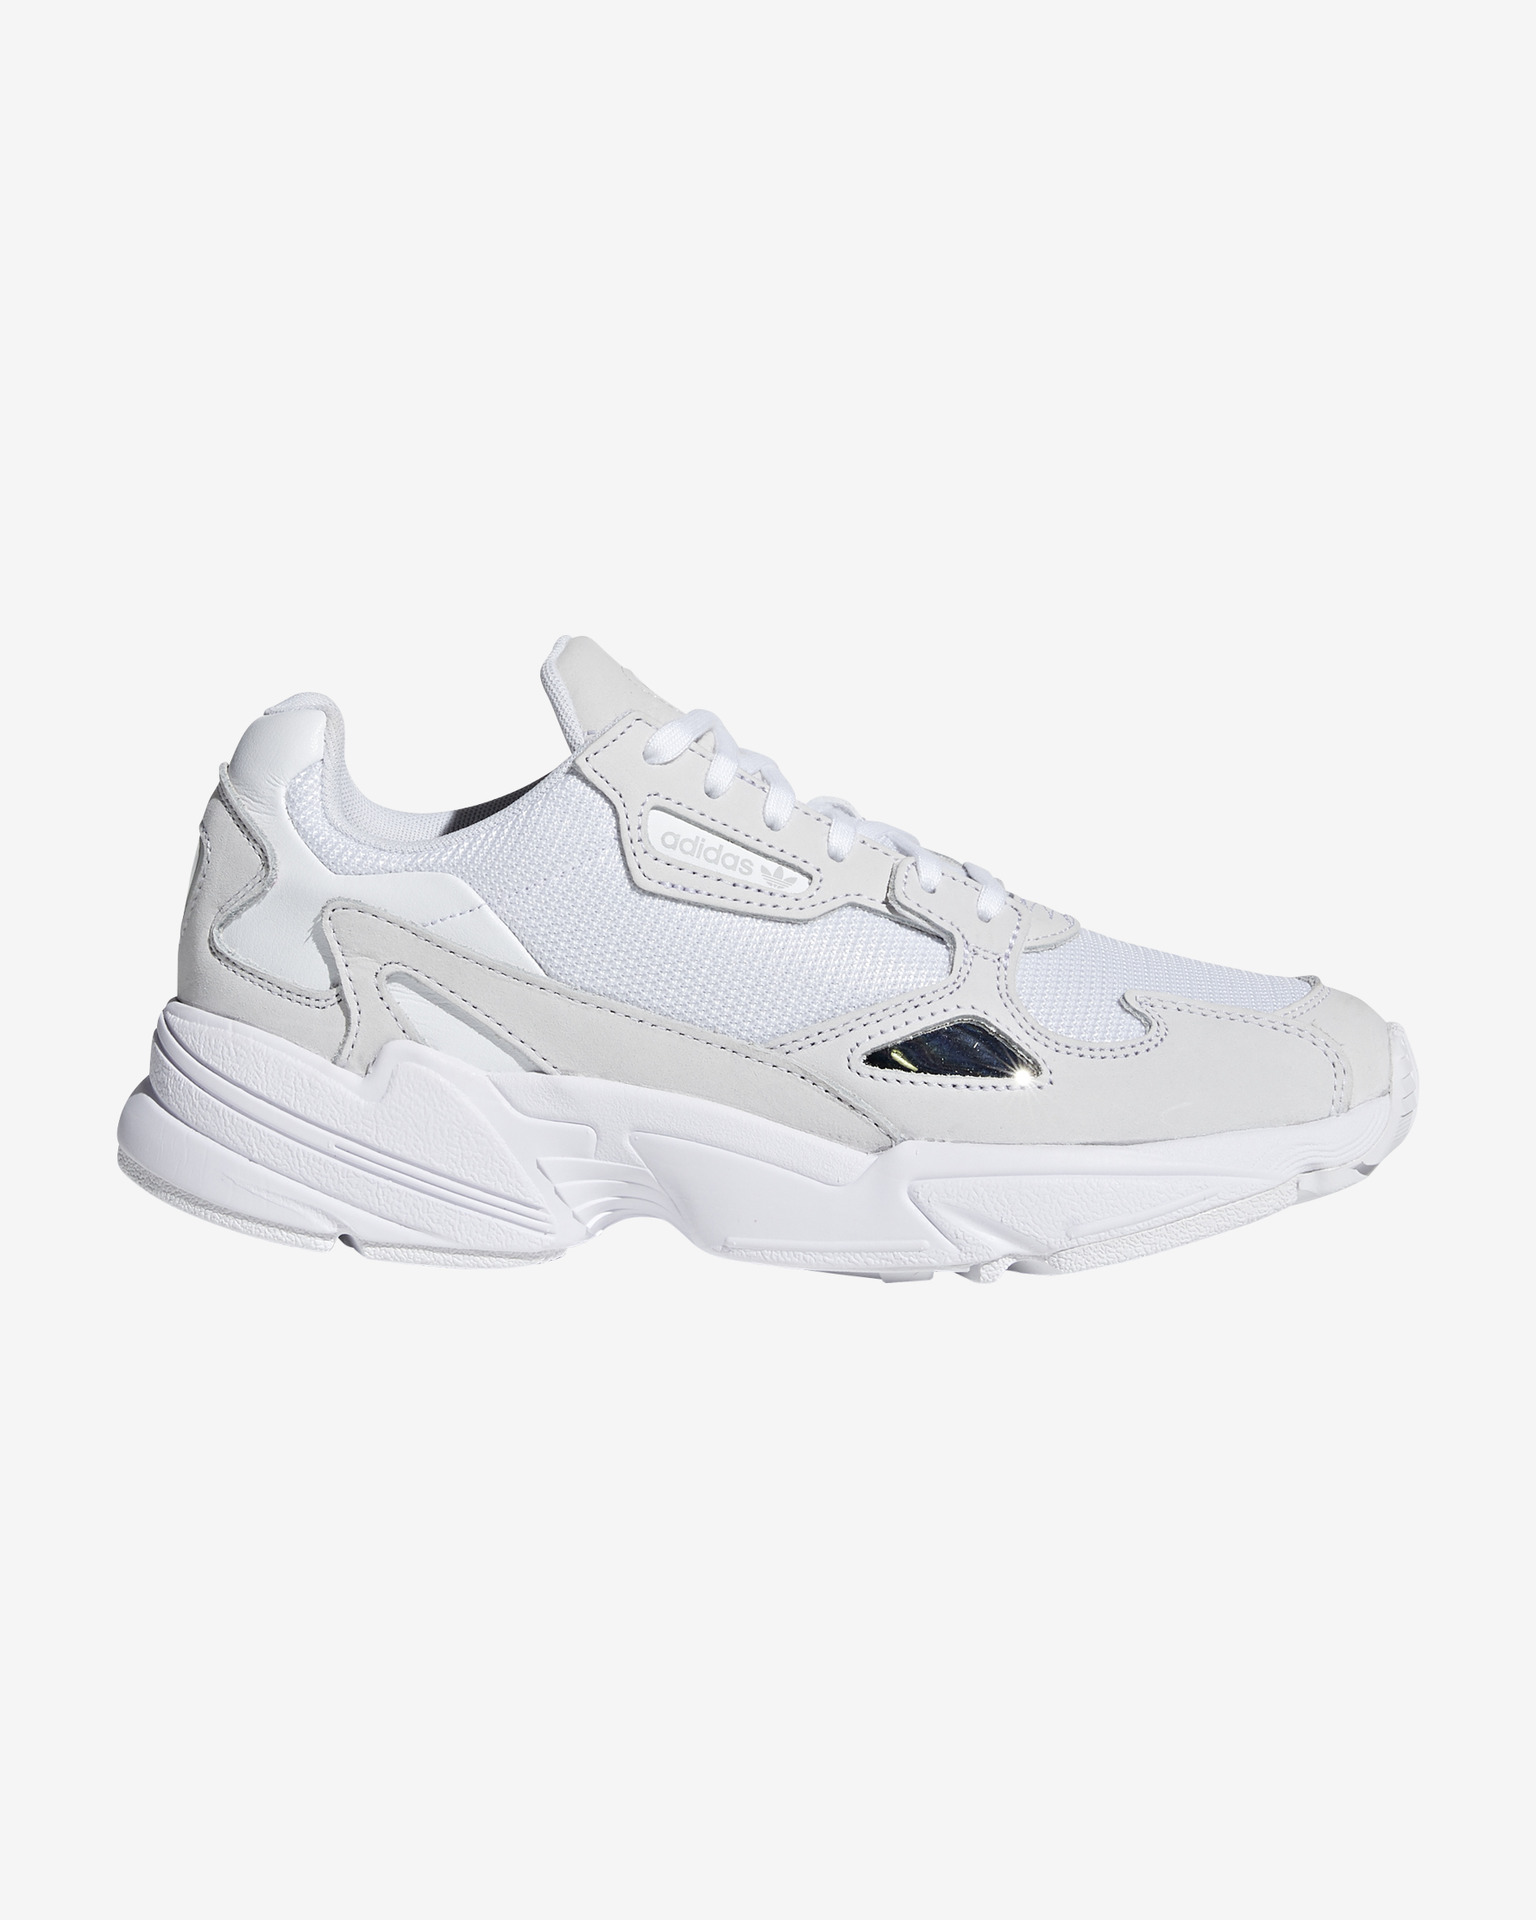 adidas Originals White And Navy Falcon Trainers | Lyst